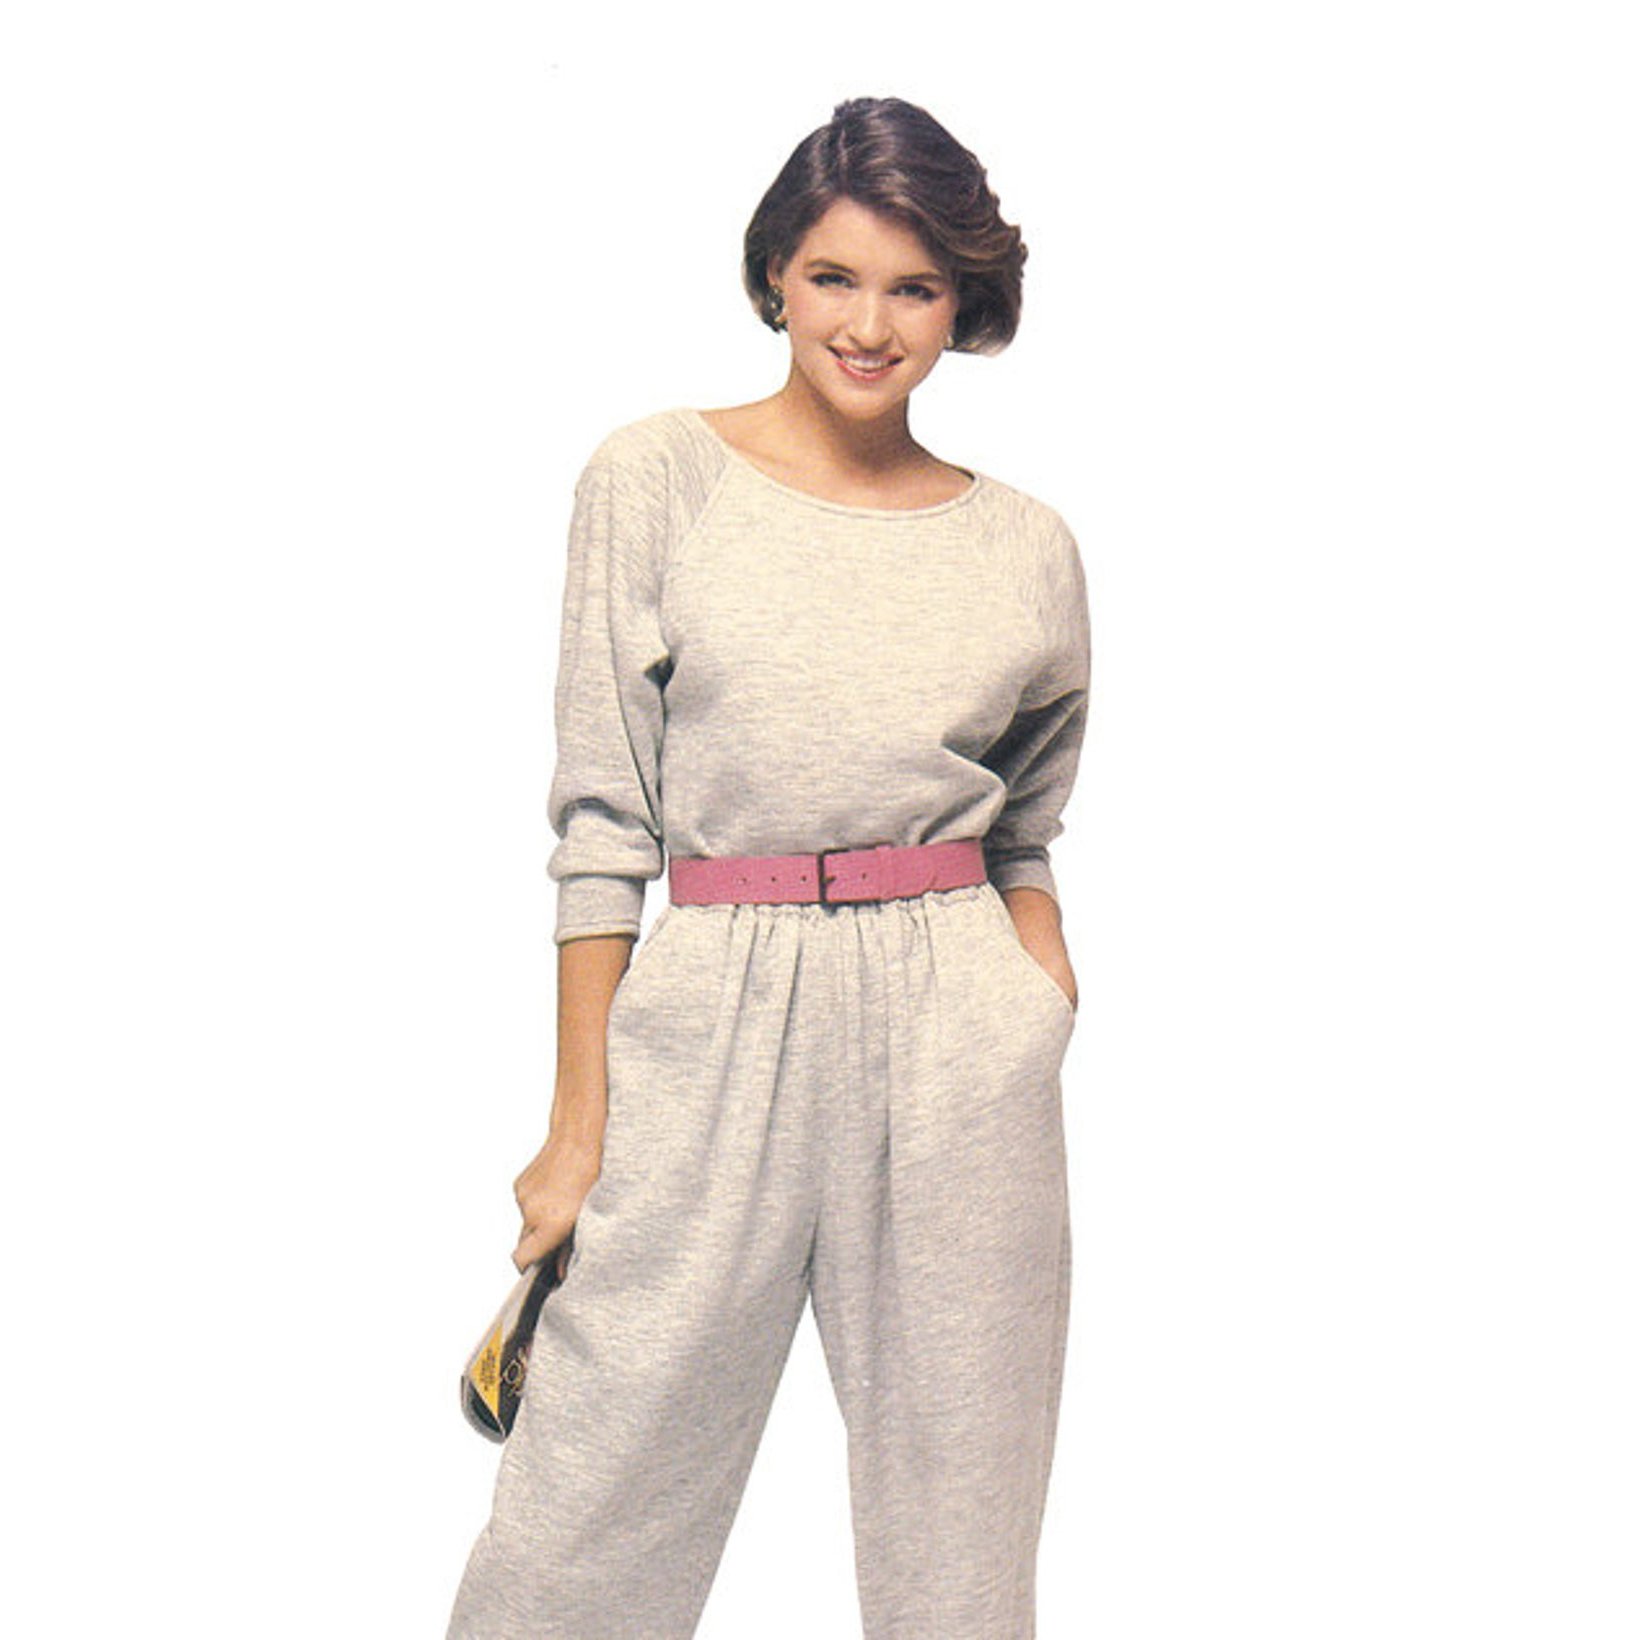 Butterick 5363 top and pants pattern